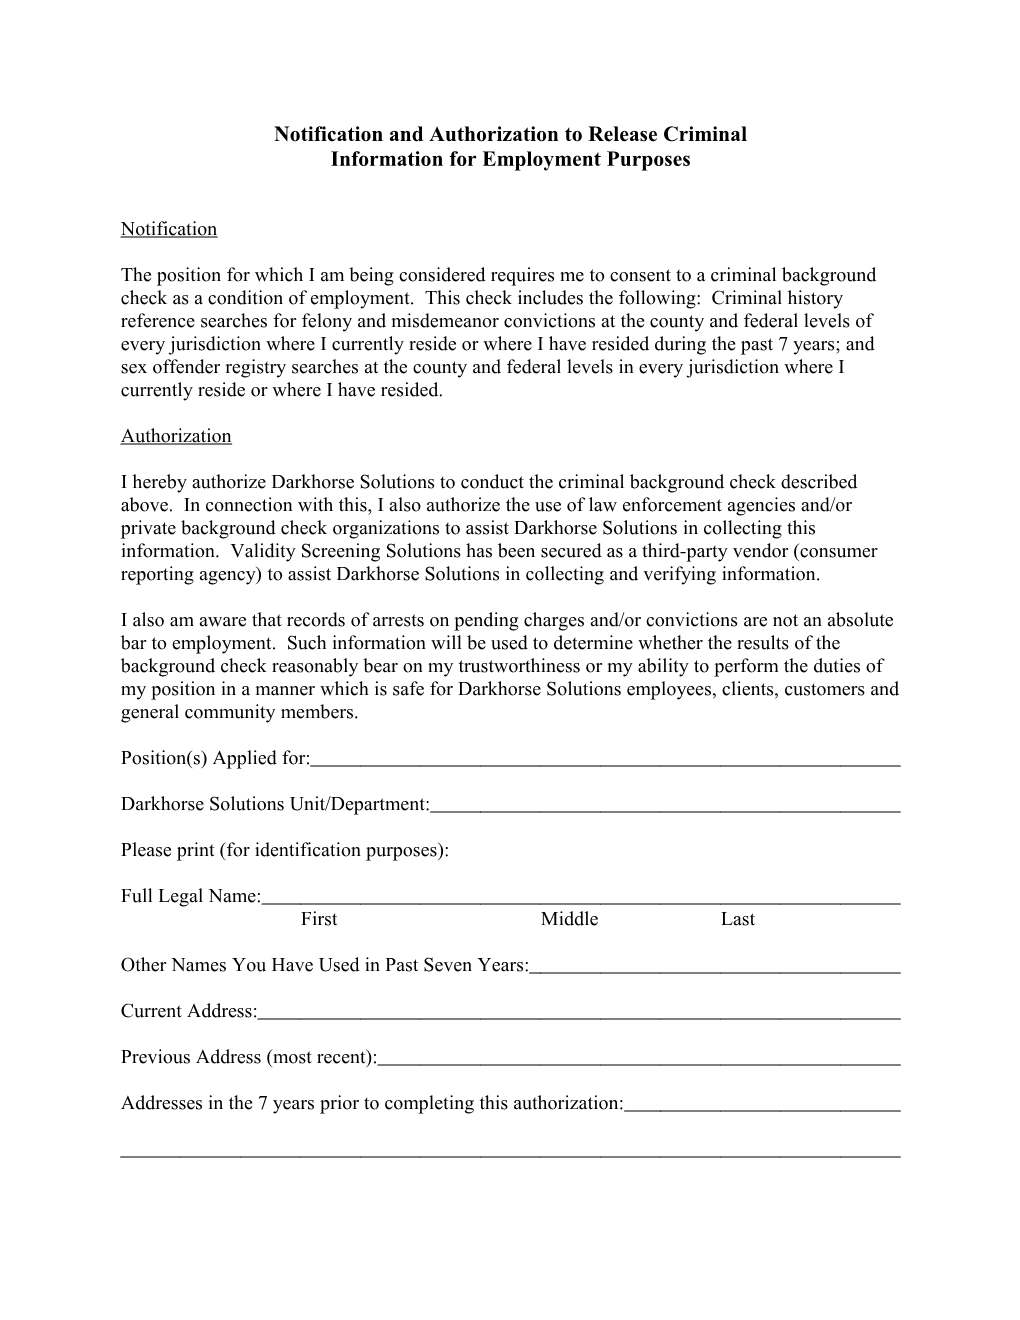 Notification and Authorization to Release Criminal Information for Employment Purposes